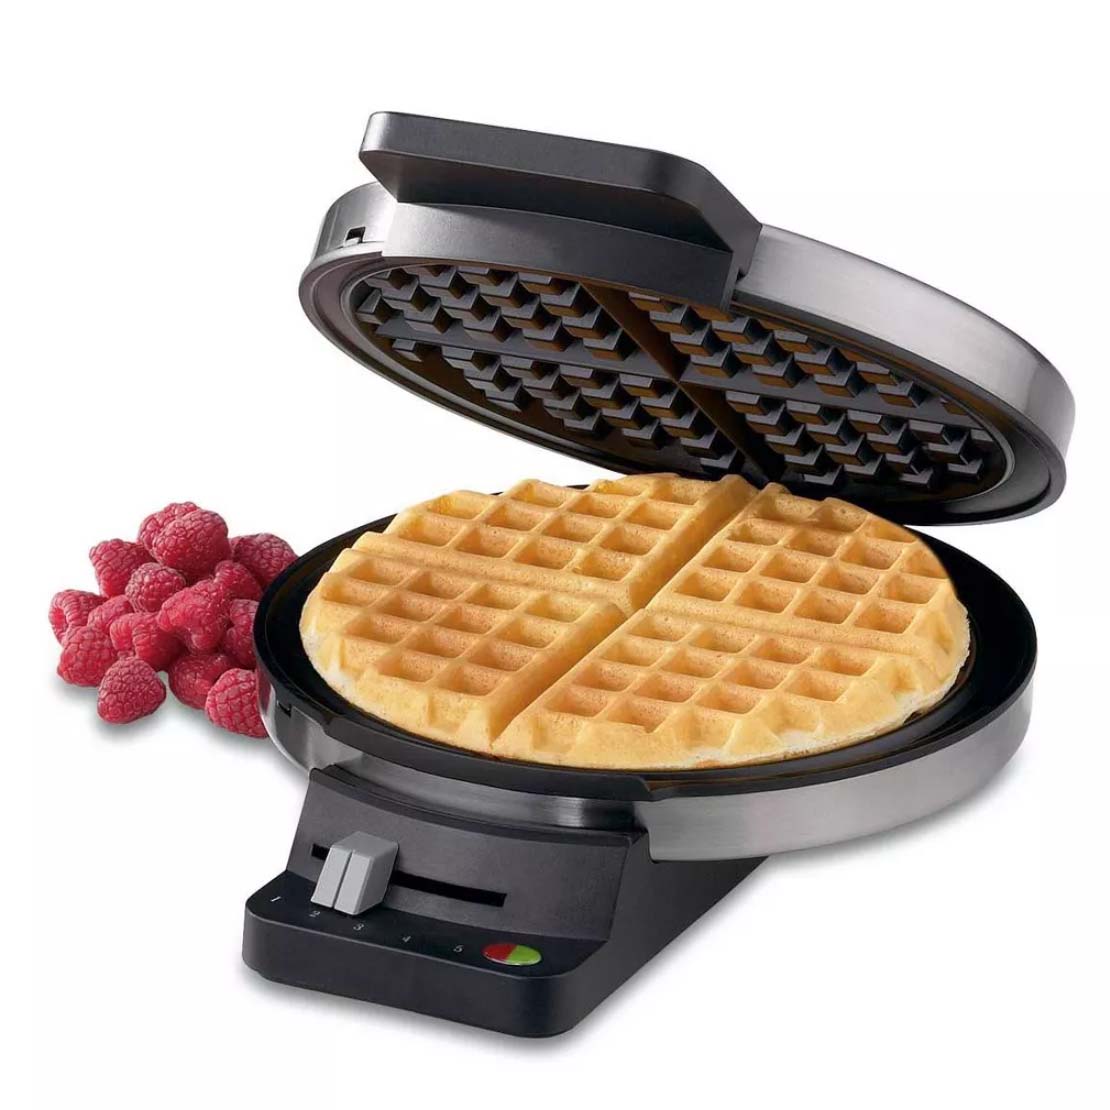 Waffle maker with waffle and raspberry